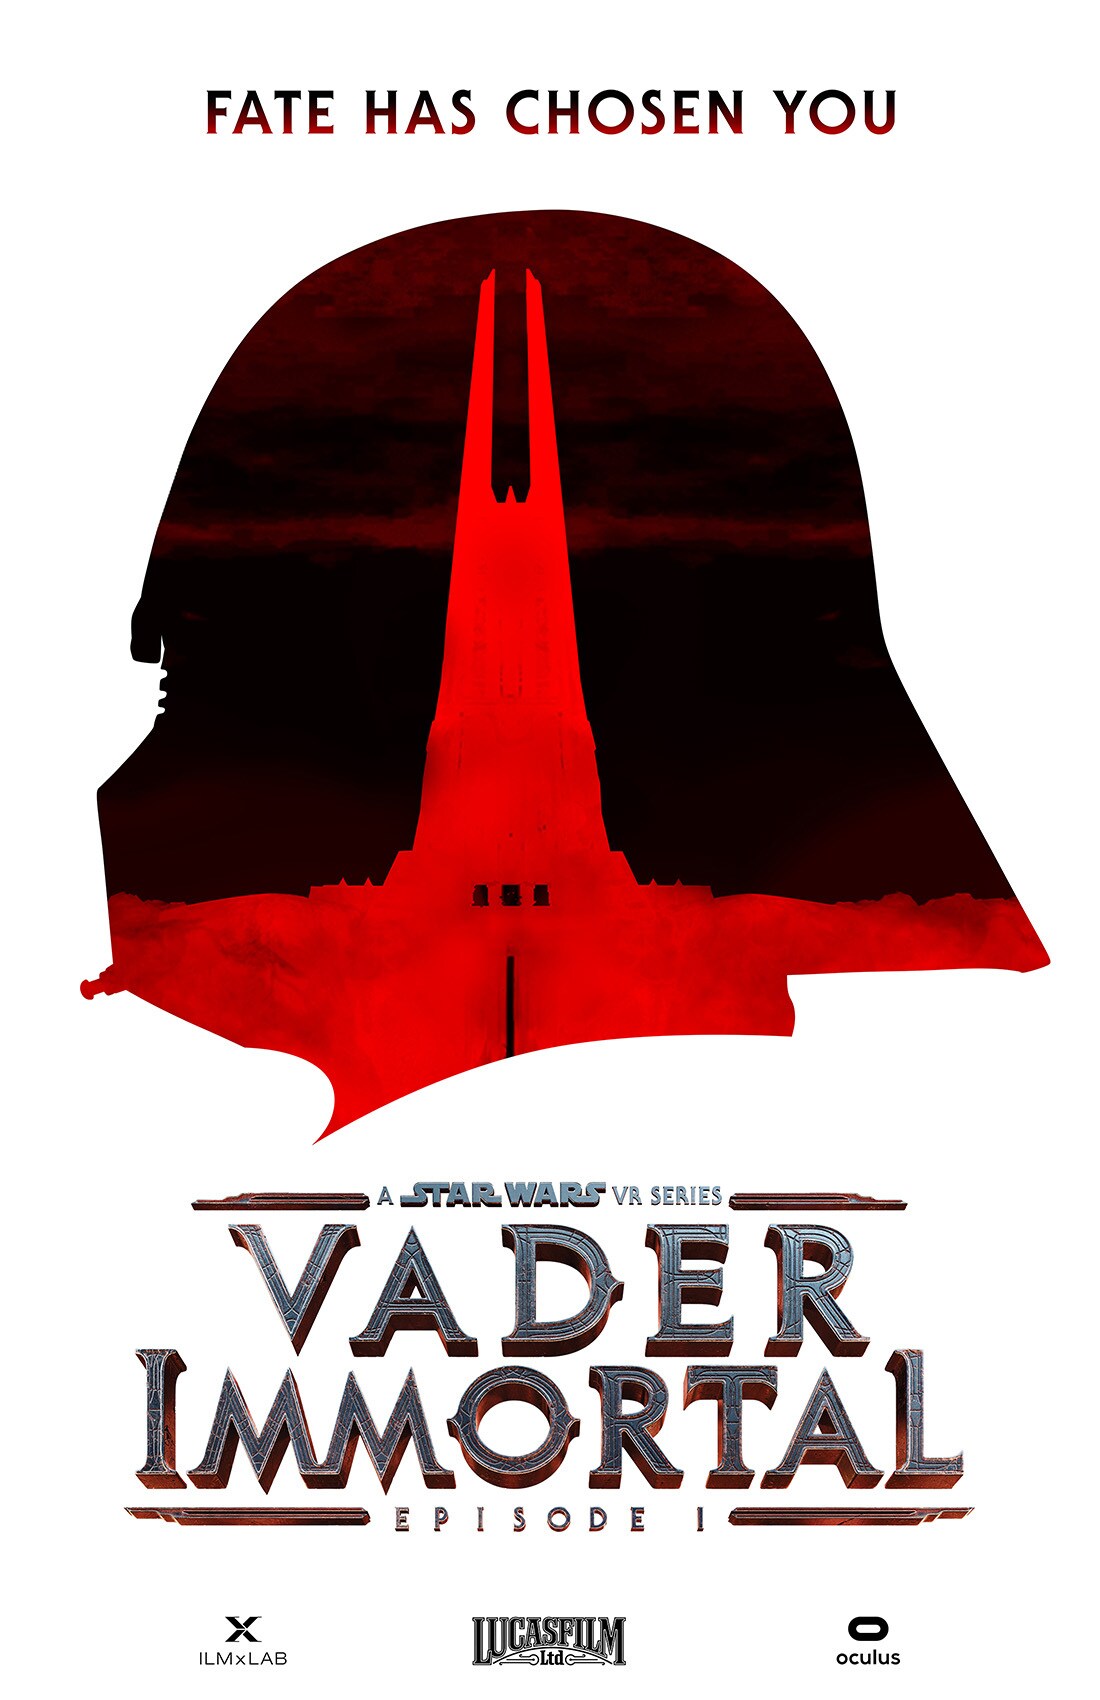 A poster from Vader Immortal.